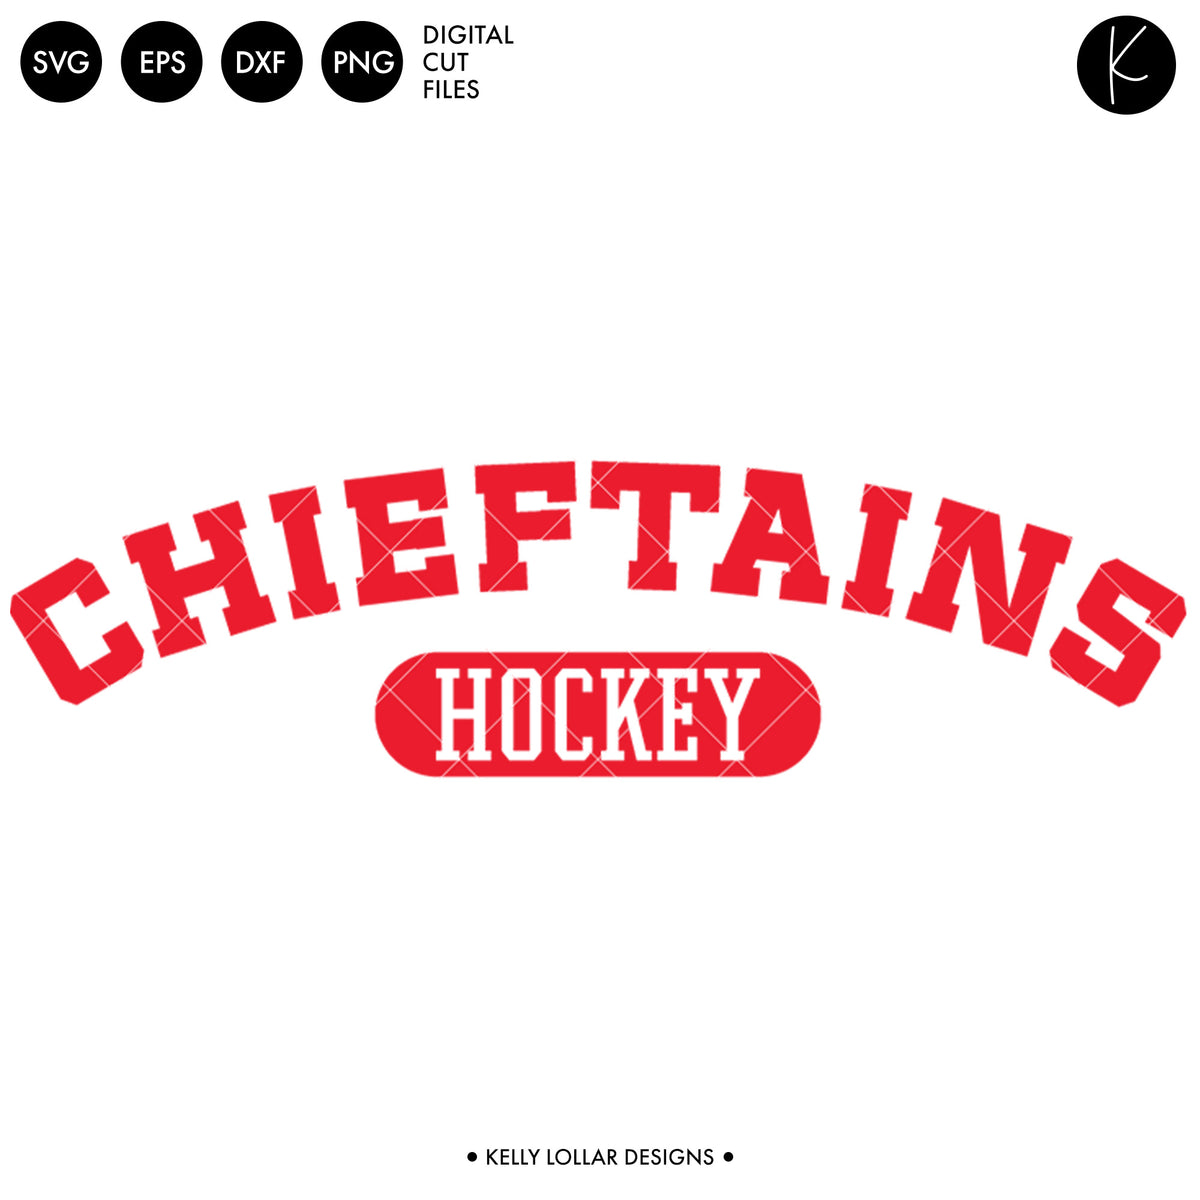 Chieftains Hockey Bundle | SVG DXF EPS PNG Cut Files